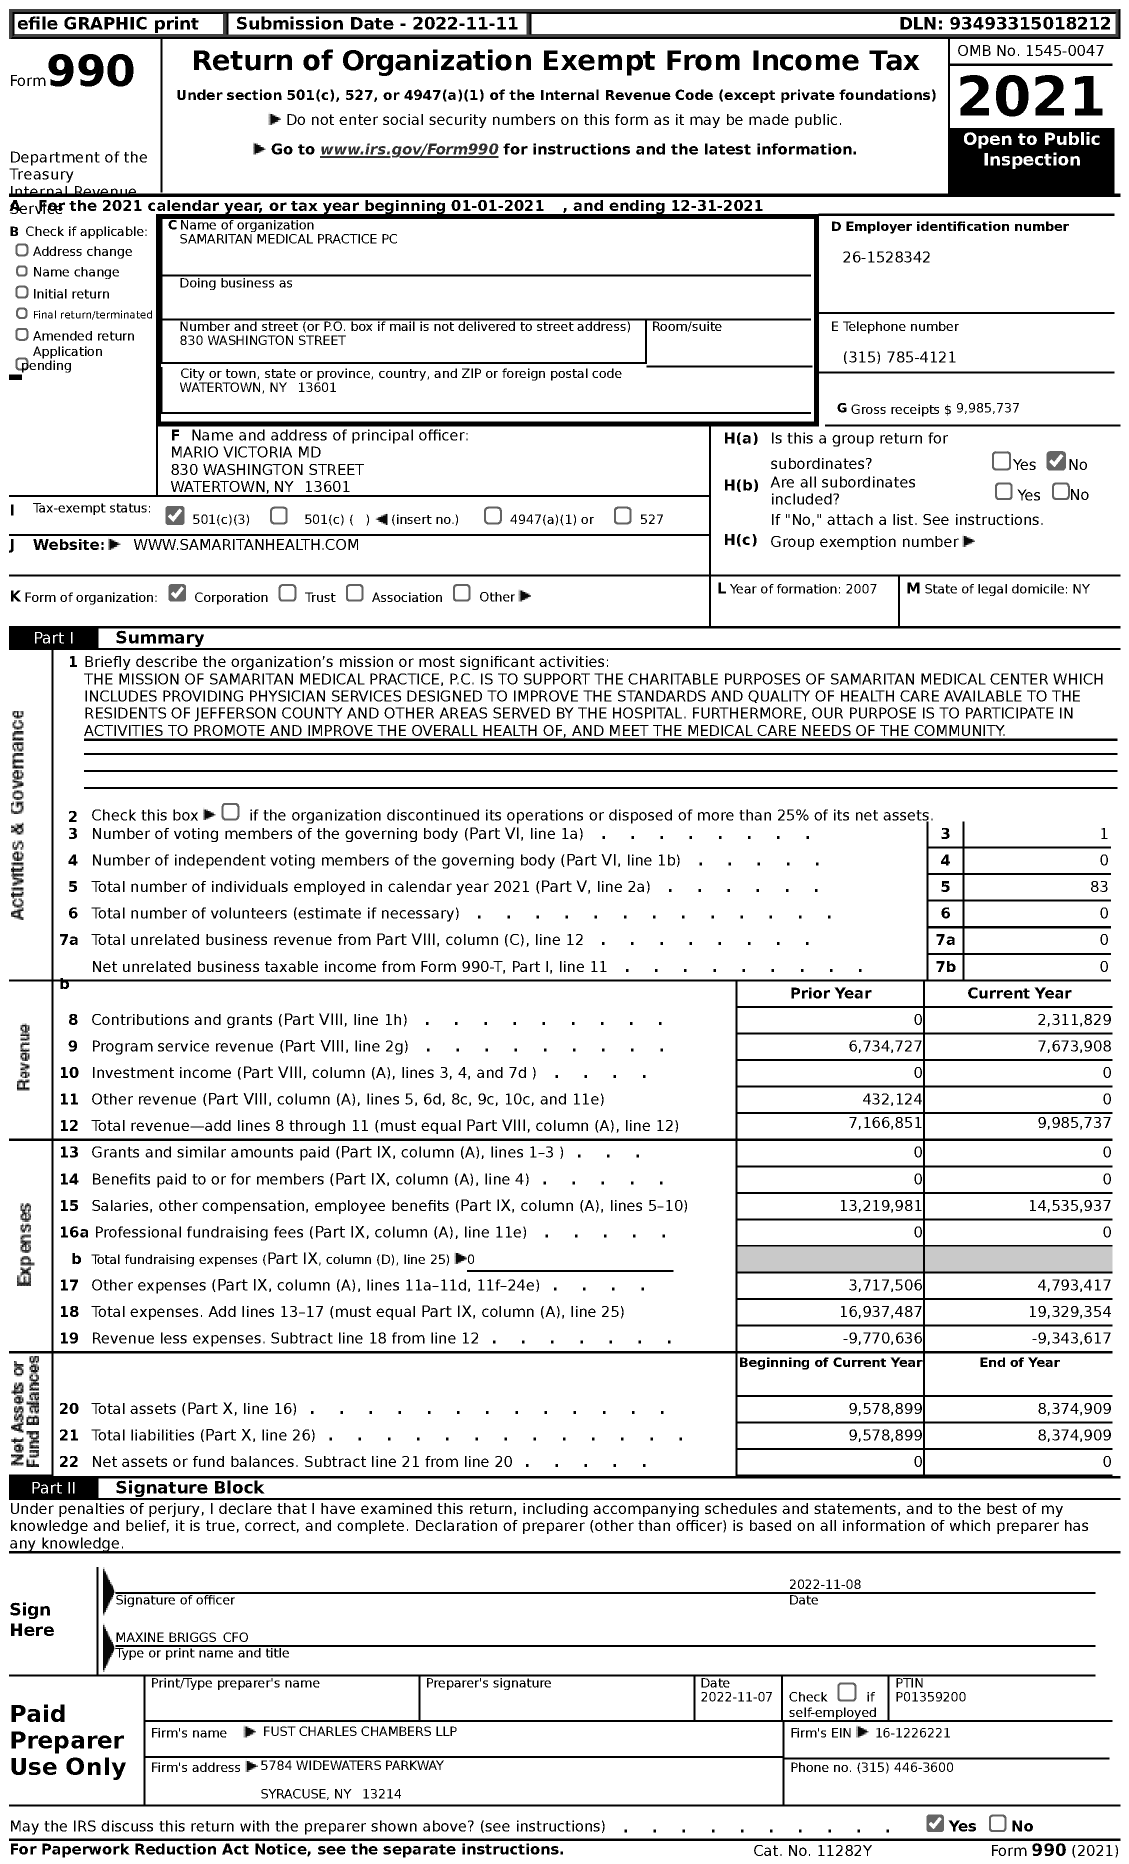 Image of first page of 2021 Form 990 for Samaritan Medical Practice PC (SMC)